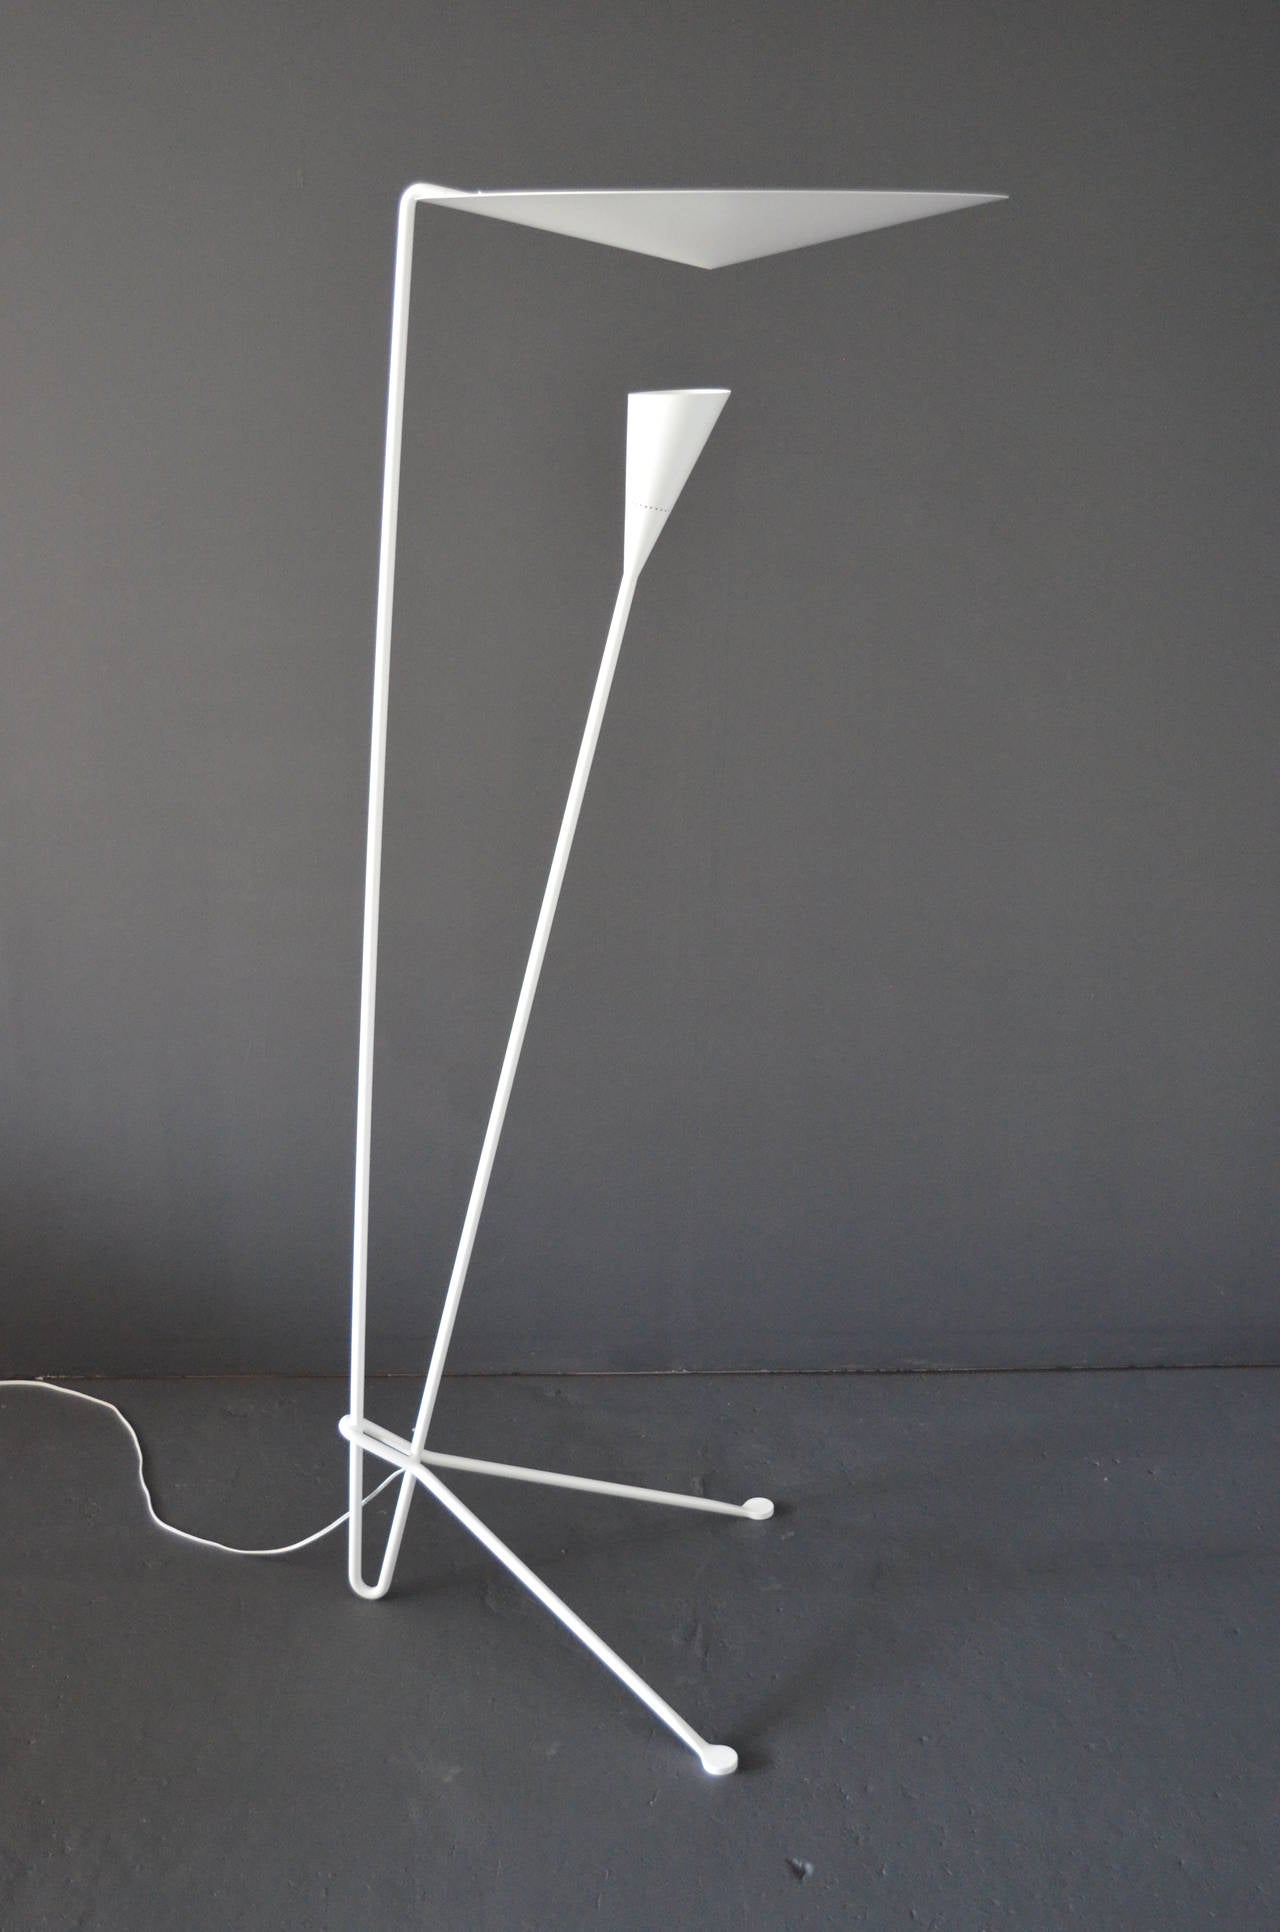 Dynamic lines and the innovative means by which the light is dispersed are signatures of this Michel Buffet Lamp. Light shines from the shade below to the conical disc above and is reflected out.

This lamp is only in white, as Michel Buffet's